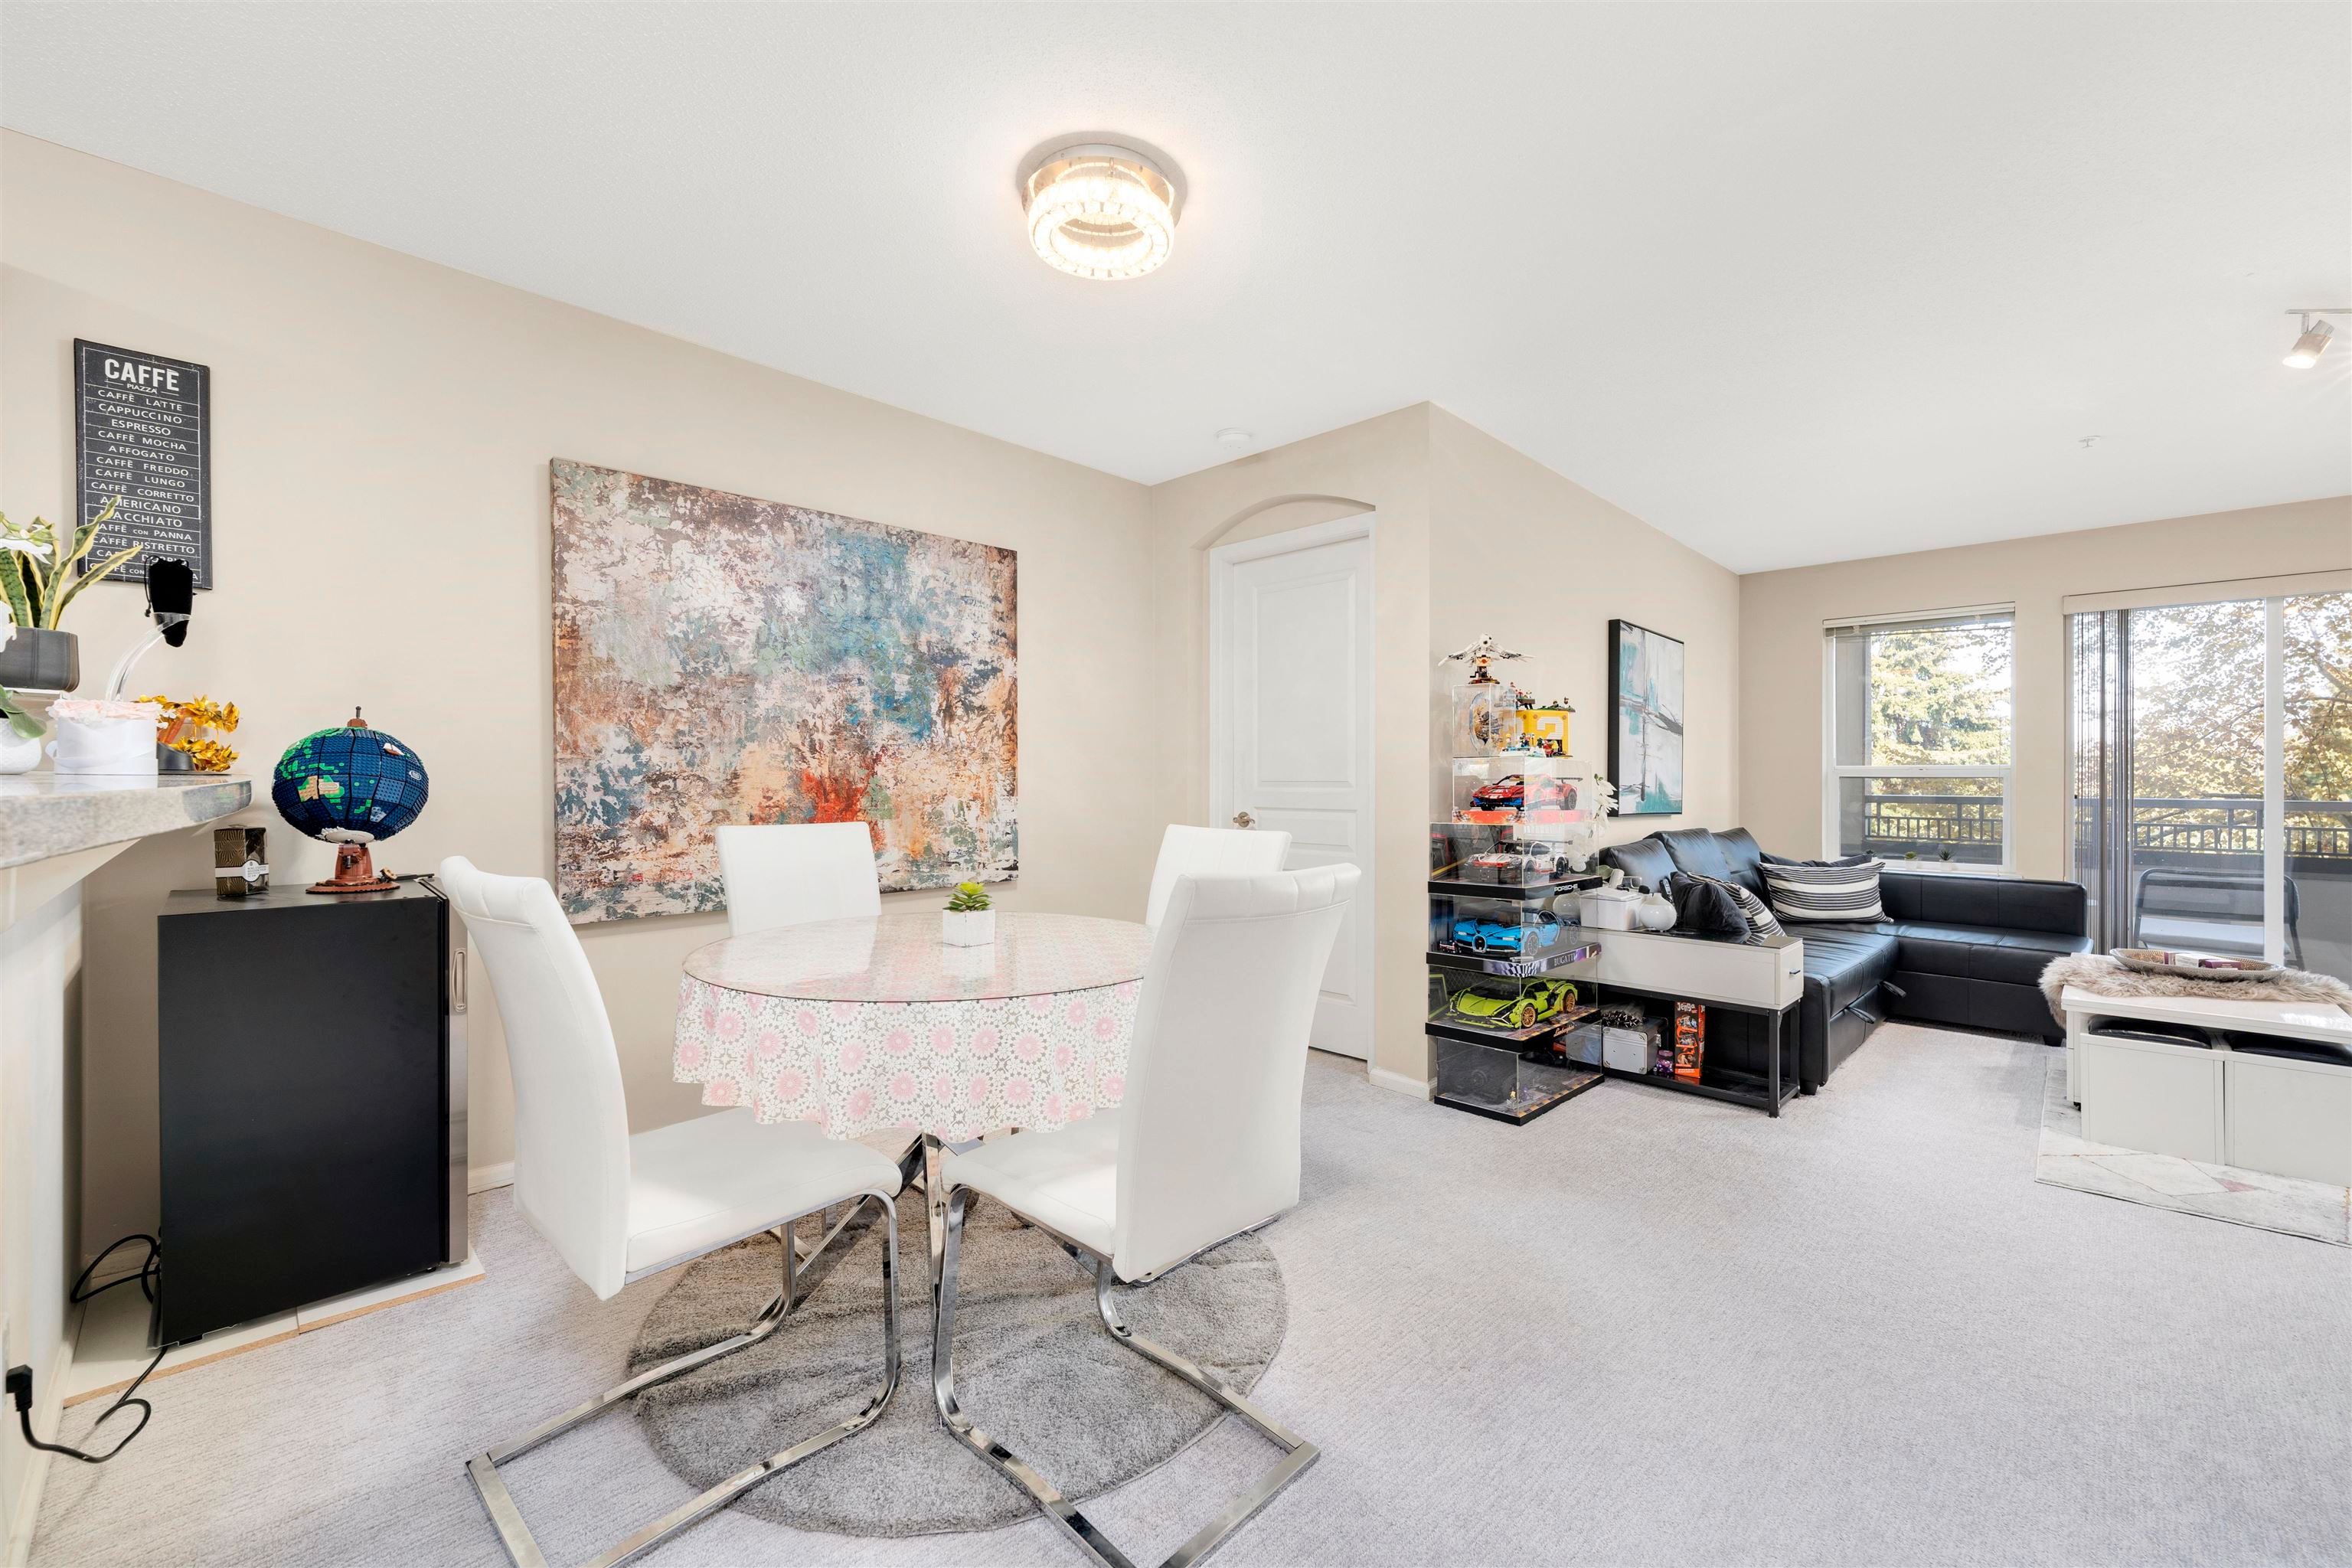  Open House on Sunday, May 1, 2022 1:00PM - 3:00PM at McLennan North, Richmond